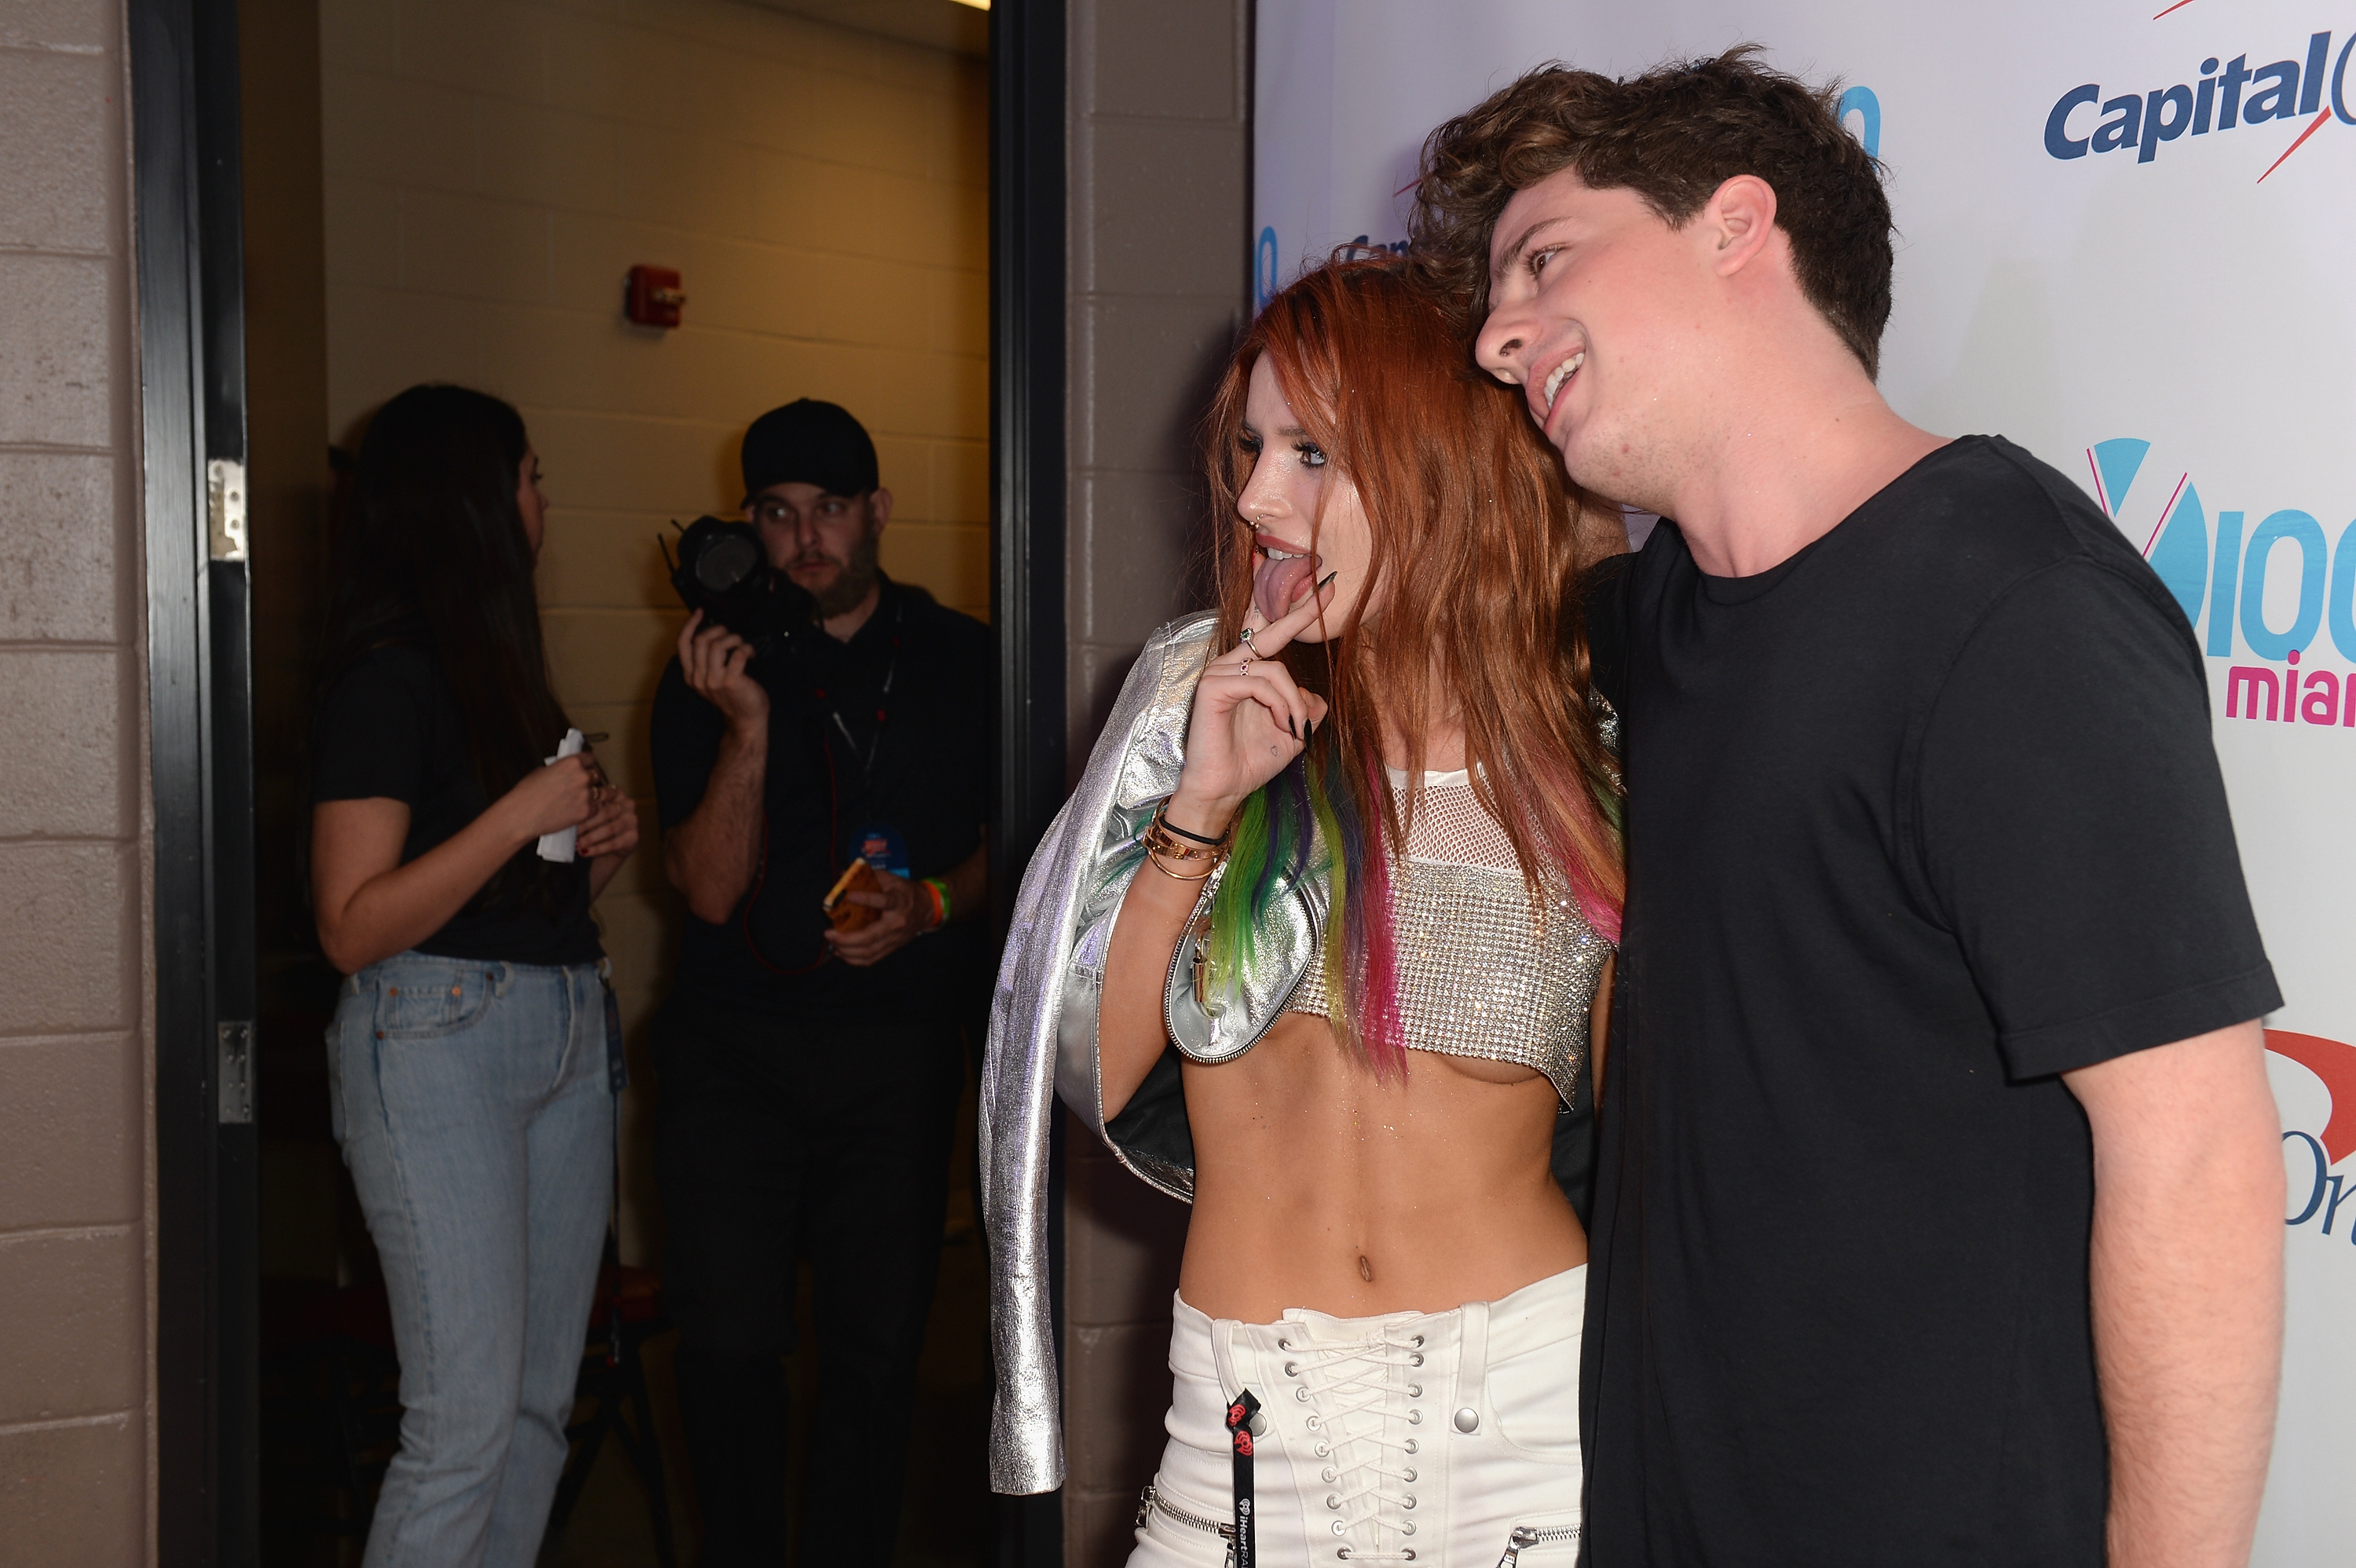 Bella Thorne and Charlie Puth